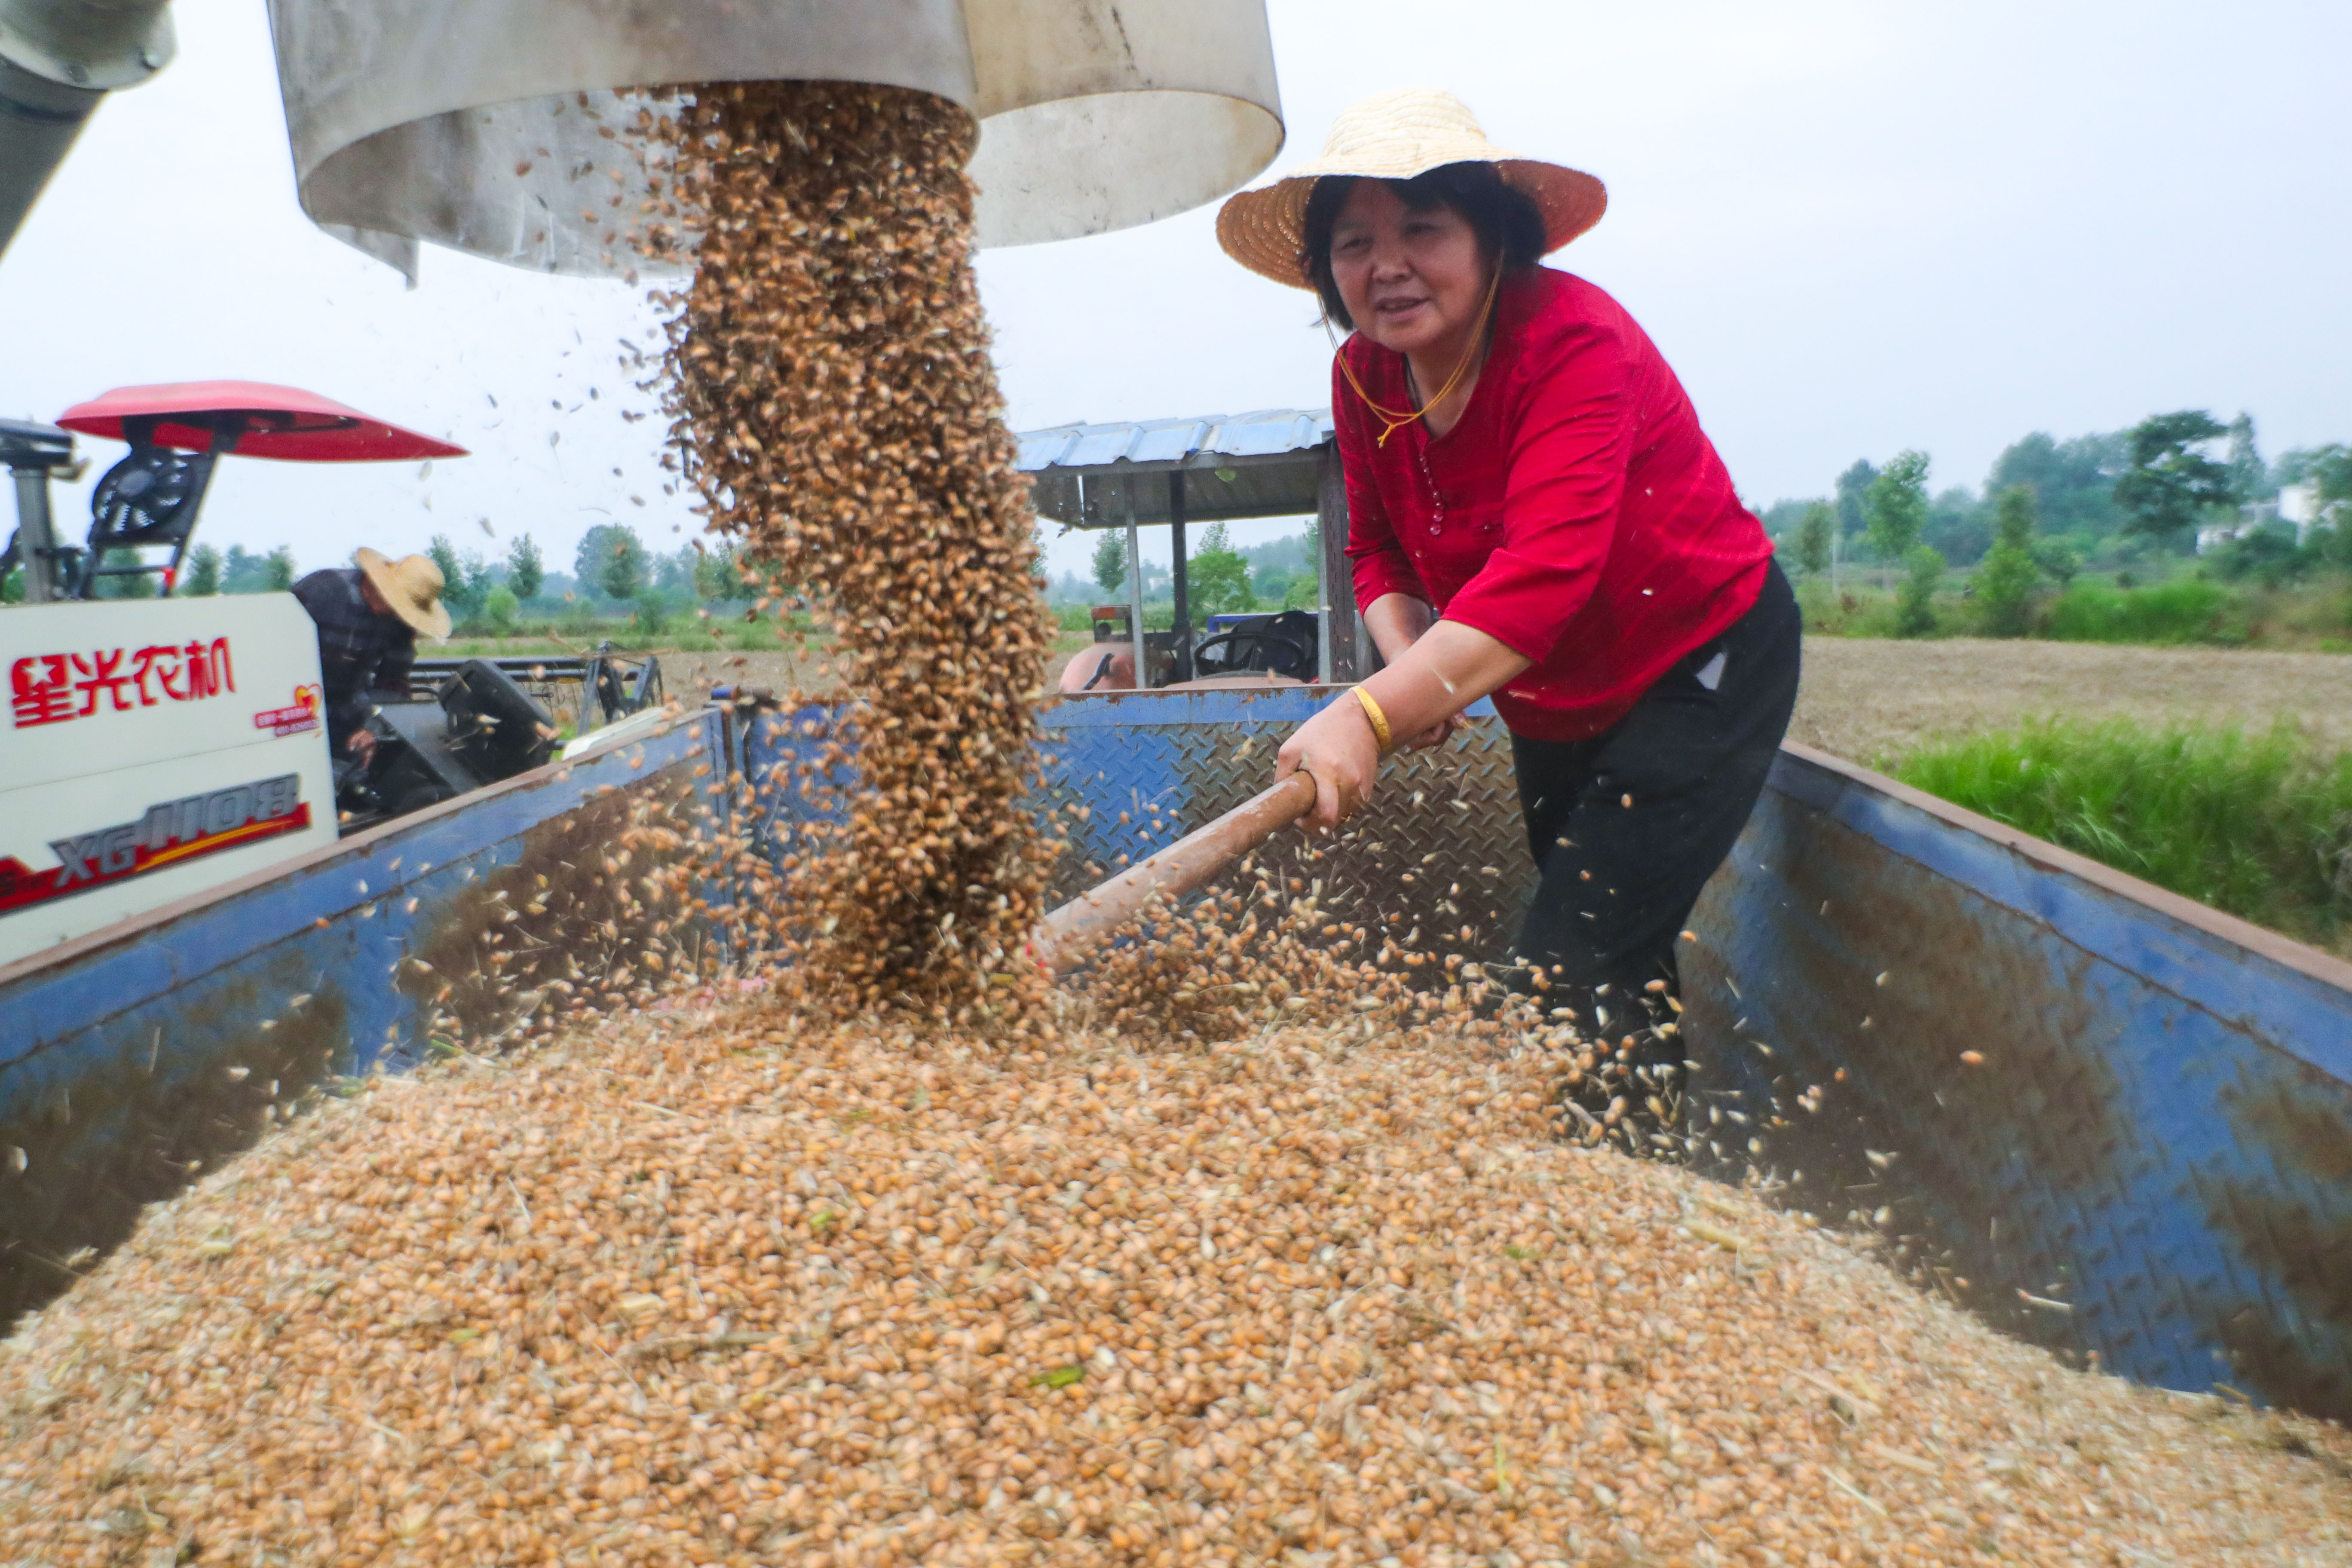 China Allots USD28 Million for Disaster Relief as Heavy Rains Hit Henan Wheat Harvest